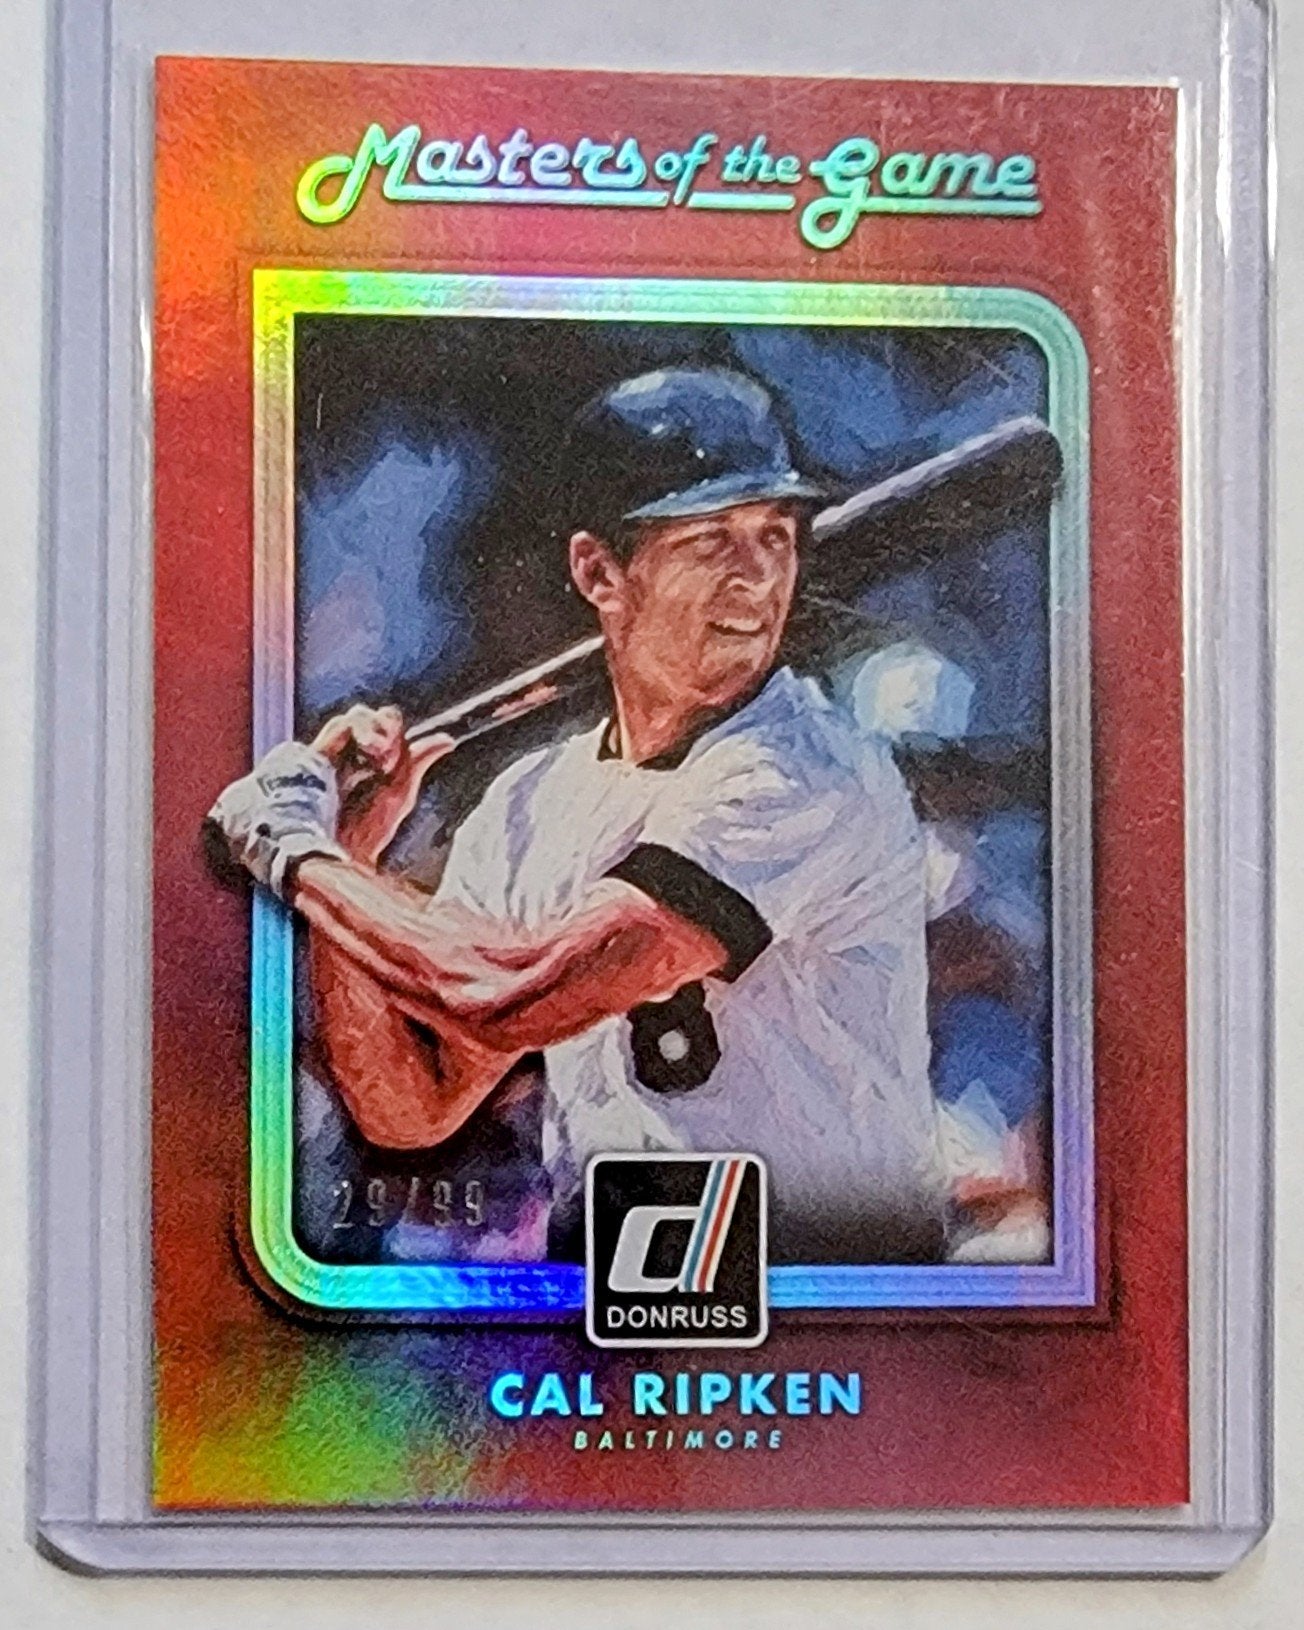 2016 Donruss Cal Ripken Masters of the Game Foil Refractor #'d/99 Gorgeous TPTV simple Xclusive Collectibles   